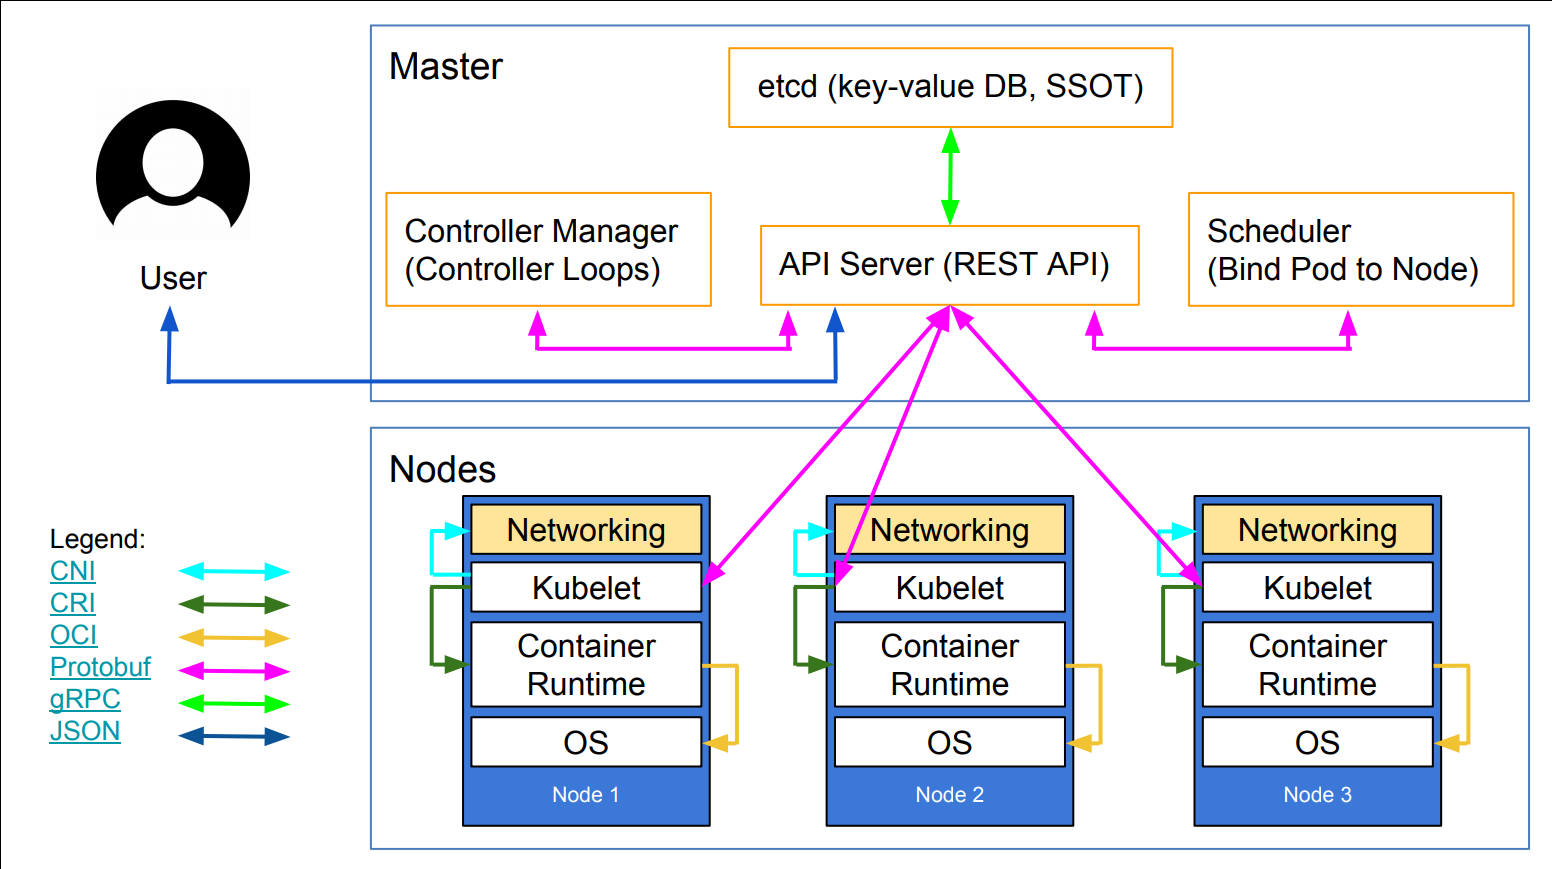 One of the best Kubernetes architecture diagrams available